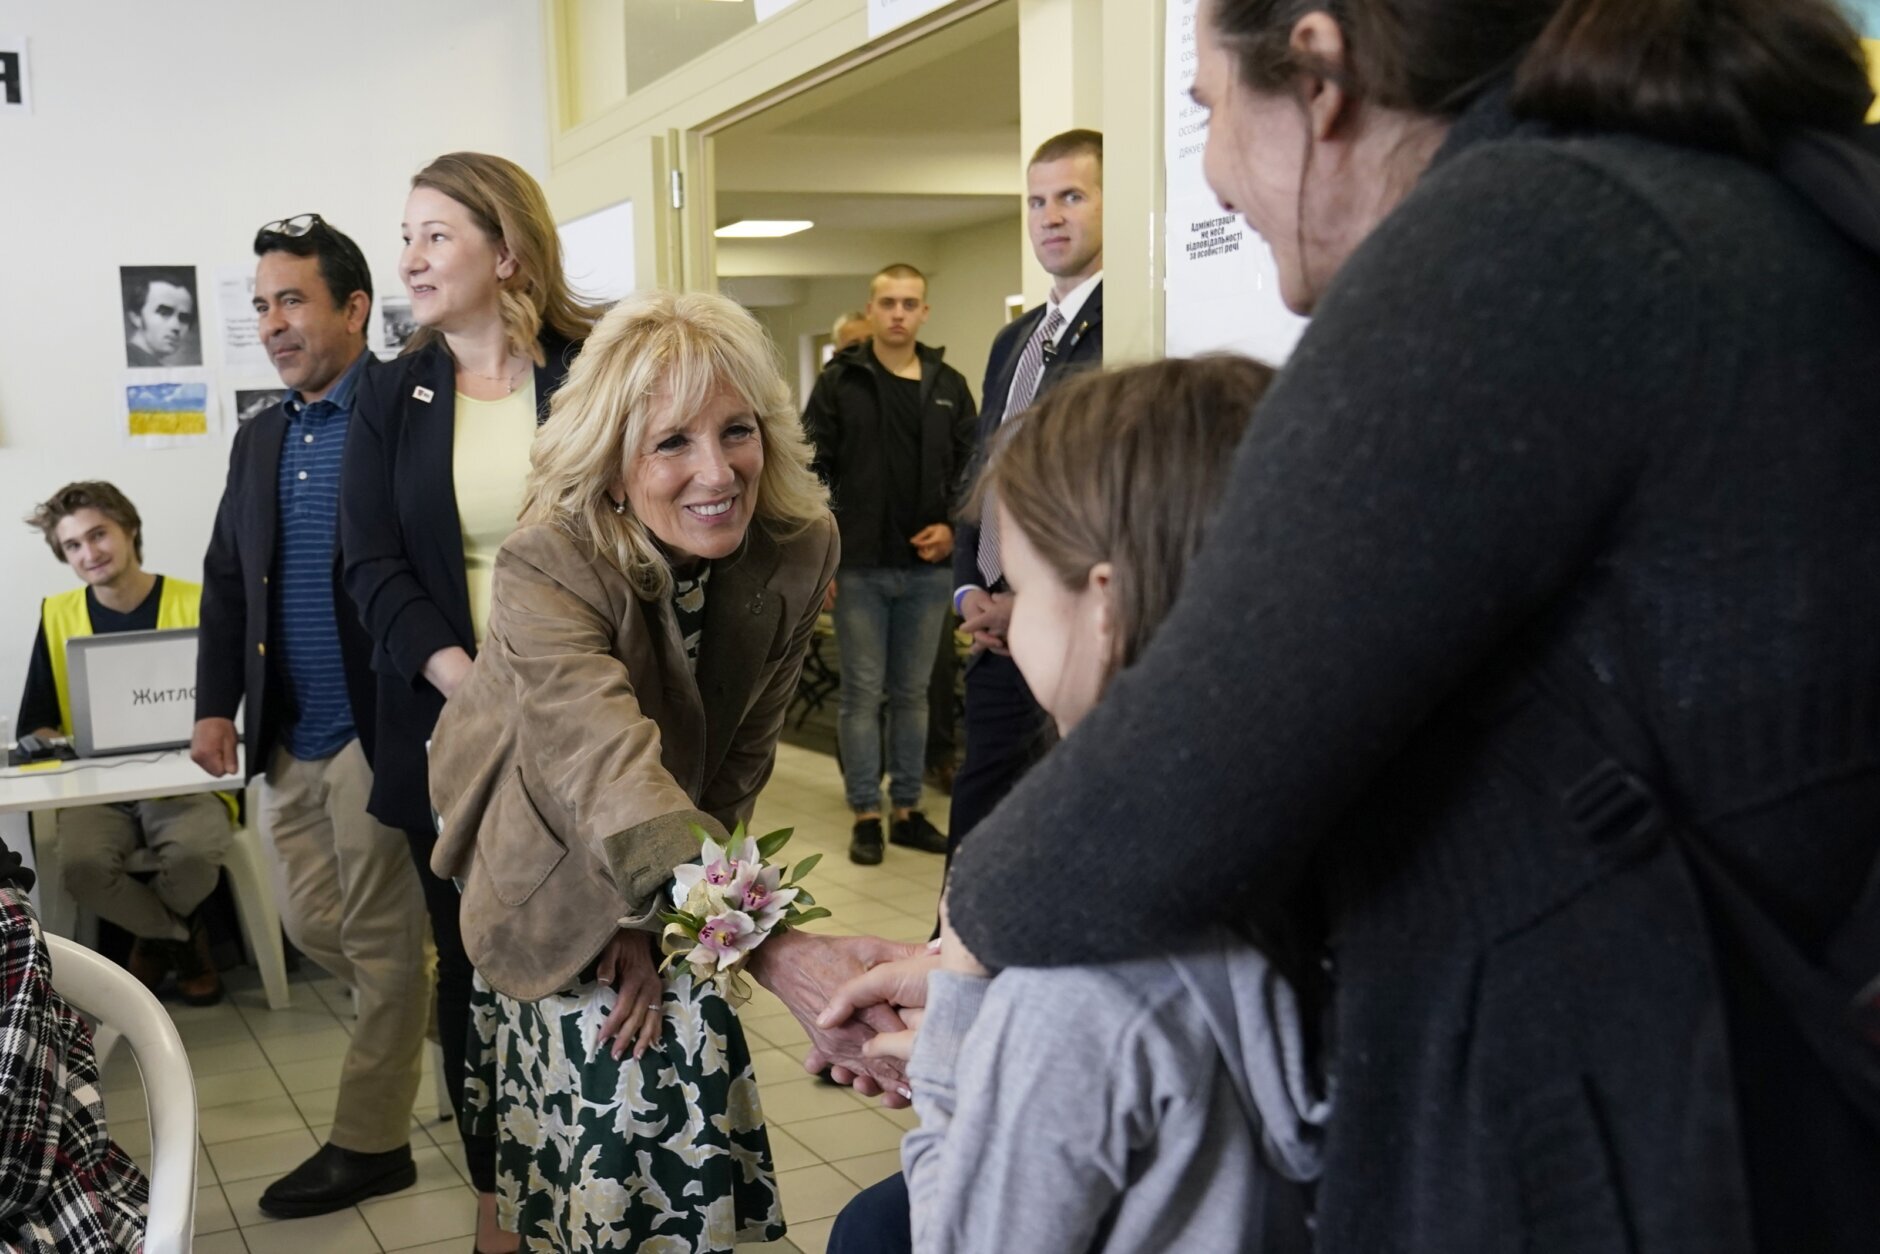 First lady Jill Biden meets Ukrainian refugees Victorie Kutocha and her daughter Yulie Kutocha, 7, at a city-run refugee center in Kosice, Slovakia, Sunday, May 8, 2022. The center is a place for Ukrainian refugees to rest and prepare for onward travel. Biden will then travel to the Slovak border with Ukraine to meet with refugees. (AP Photo/Susan Walsh, Pool)